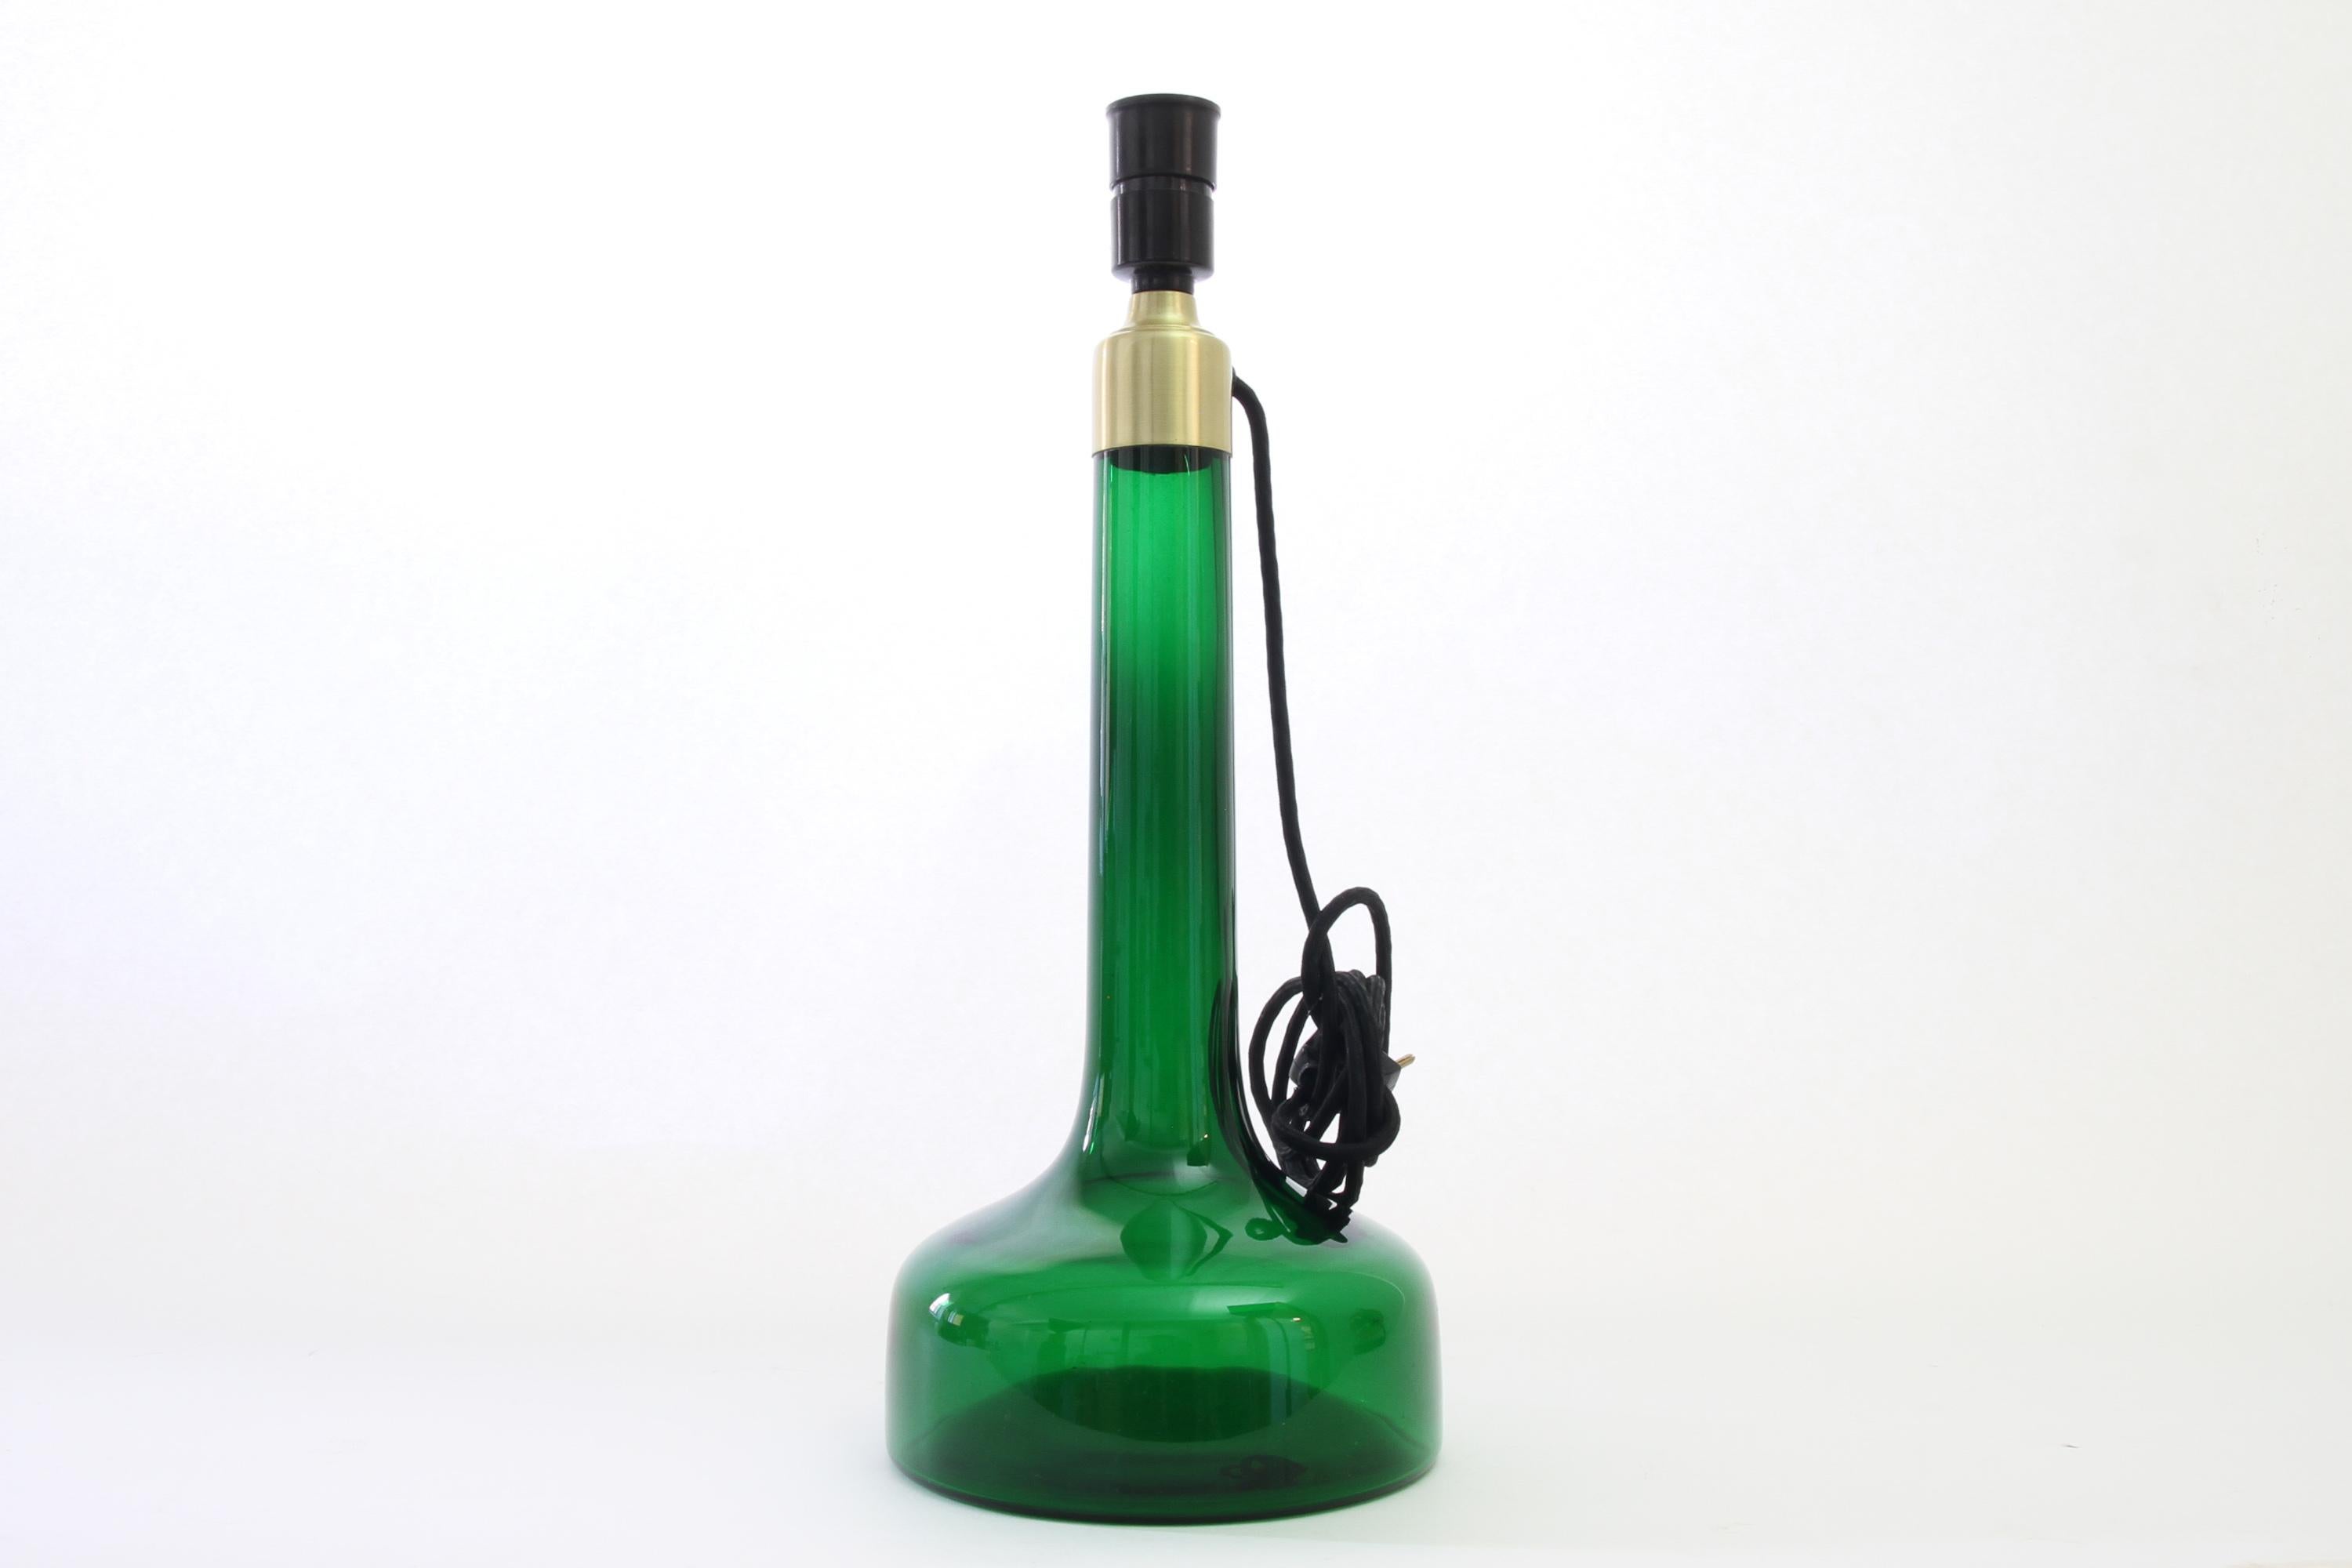 Danish green glass table lamp by Holmegaard 1960s.
Tall and slender with a wide base. E27 socket mounted on brass collar. Beautiful green color with lovely refraction.
Good condition, no damage or nicks. Working order.